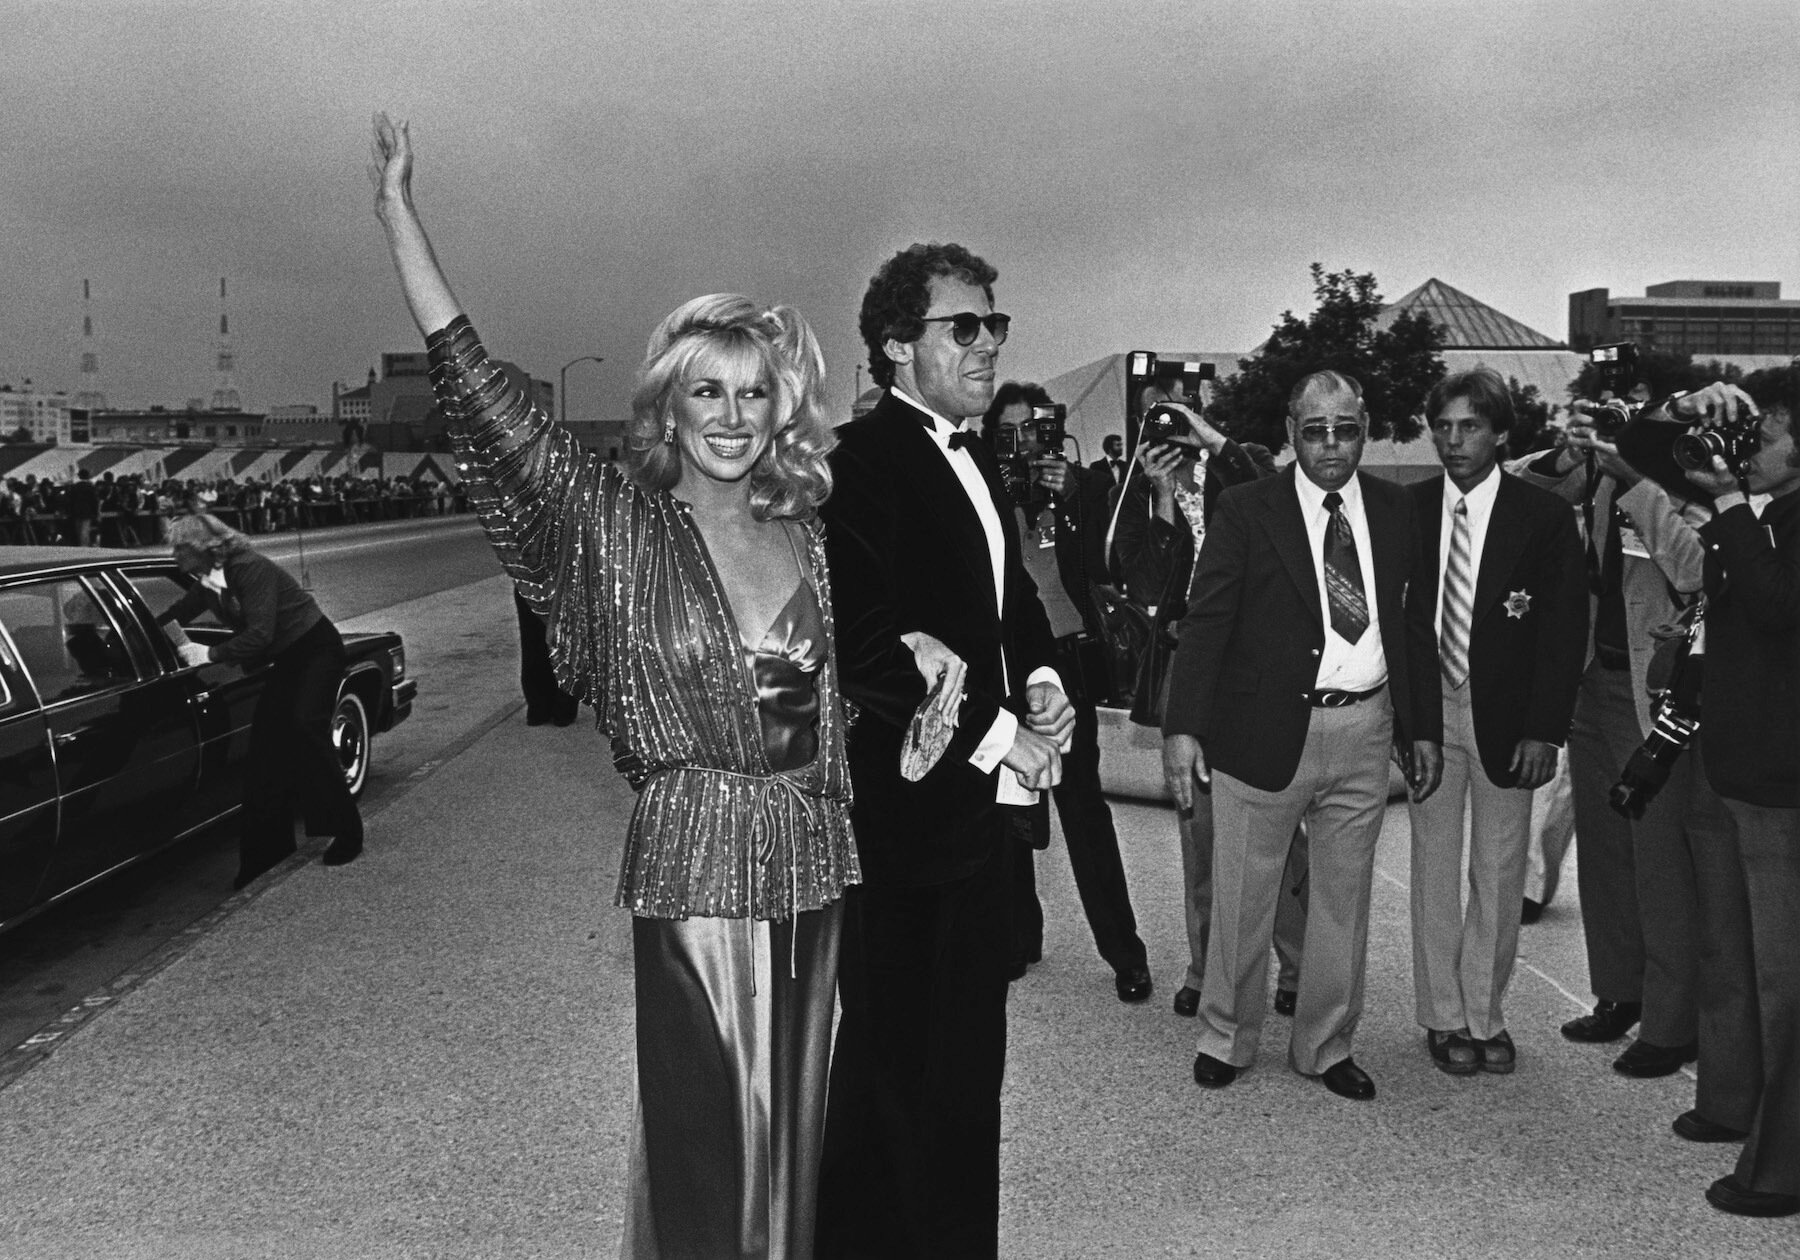 A black and white photo of Suzanne Somers and her husband Alan Hamel at the Emmy Awards in 1978